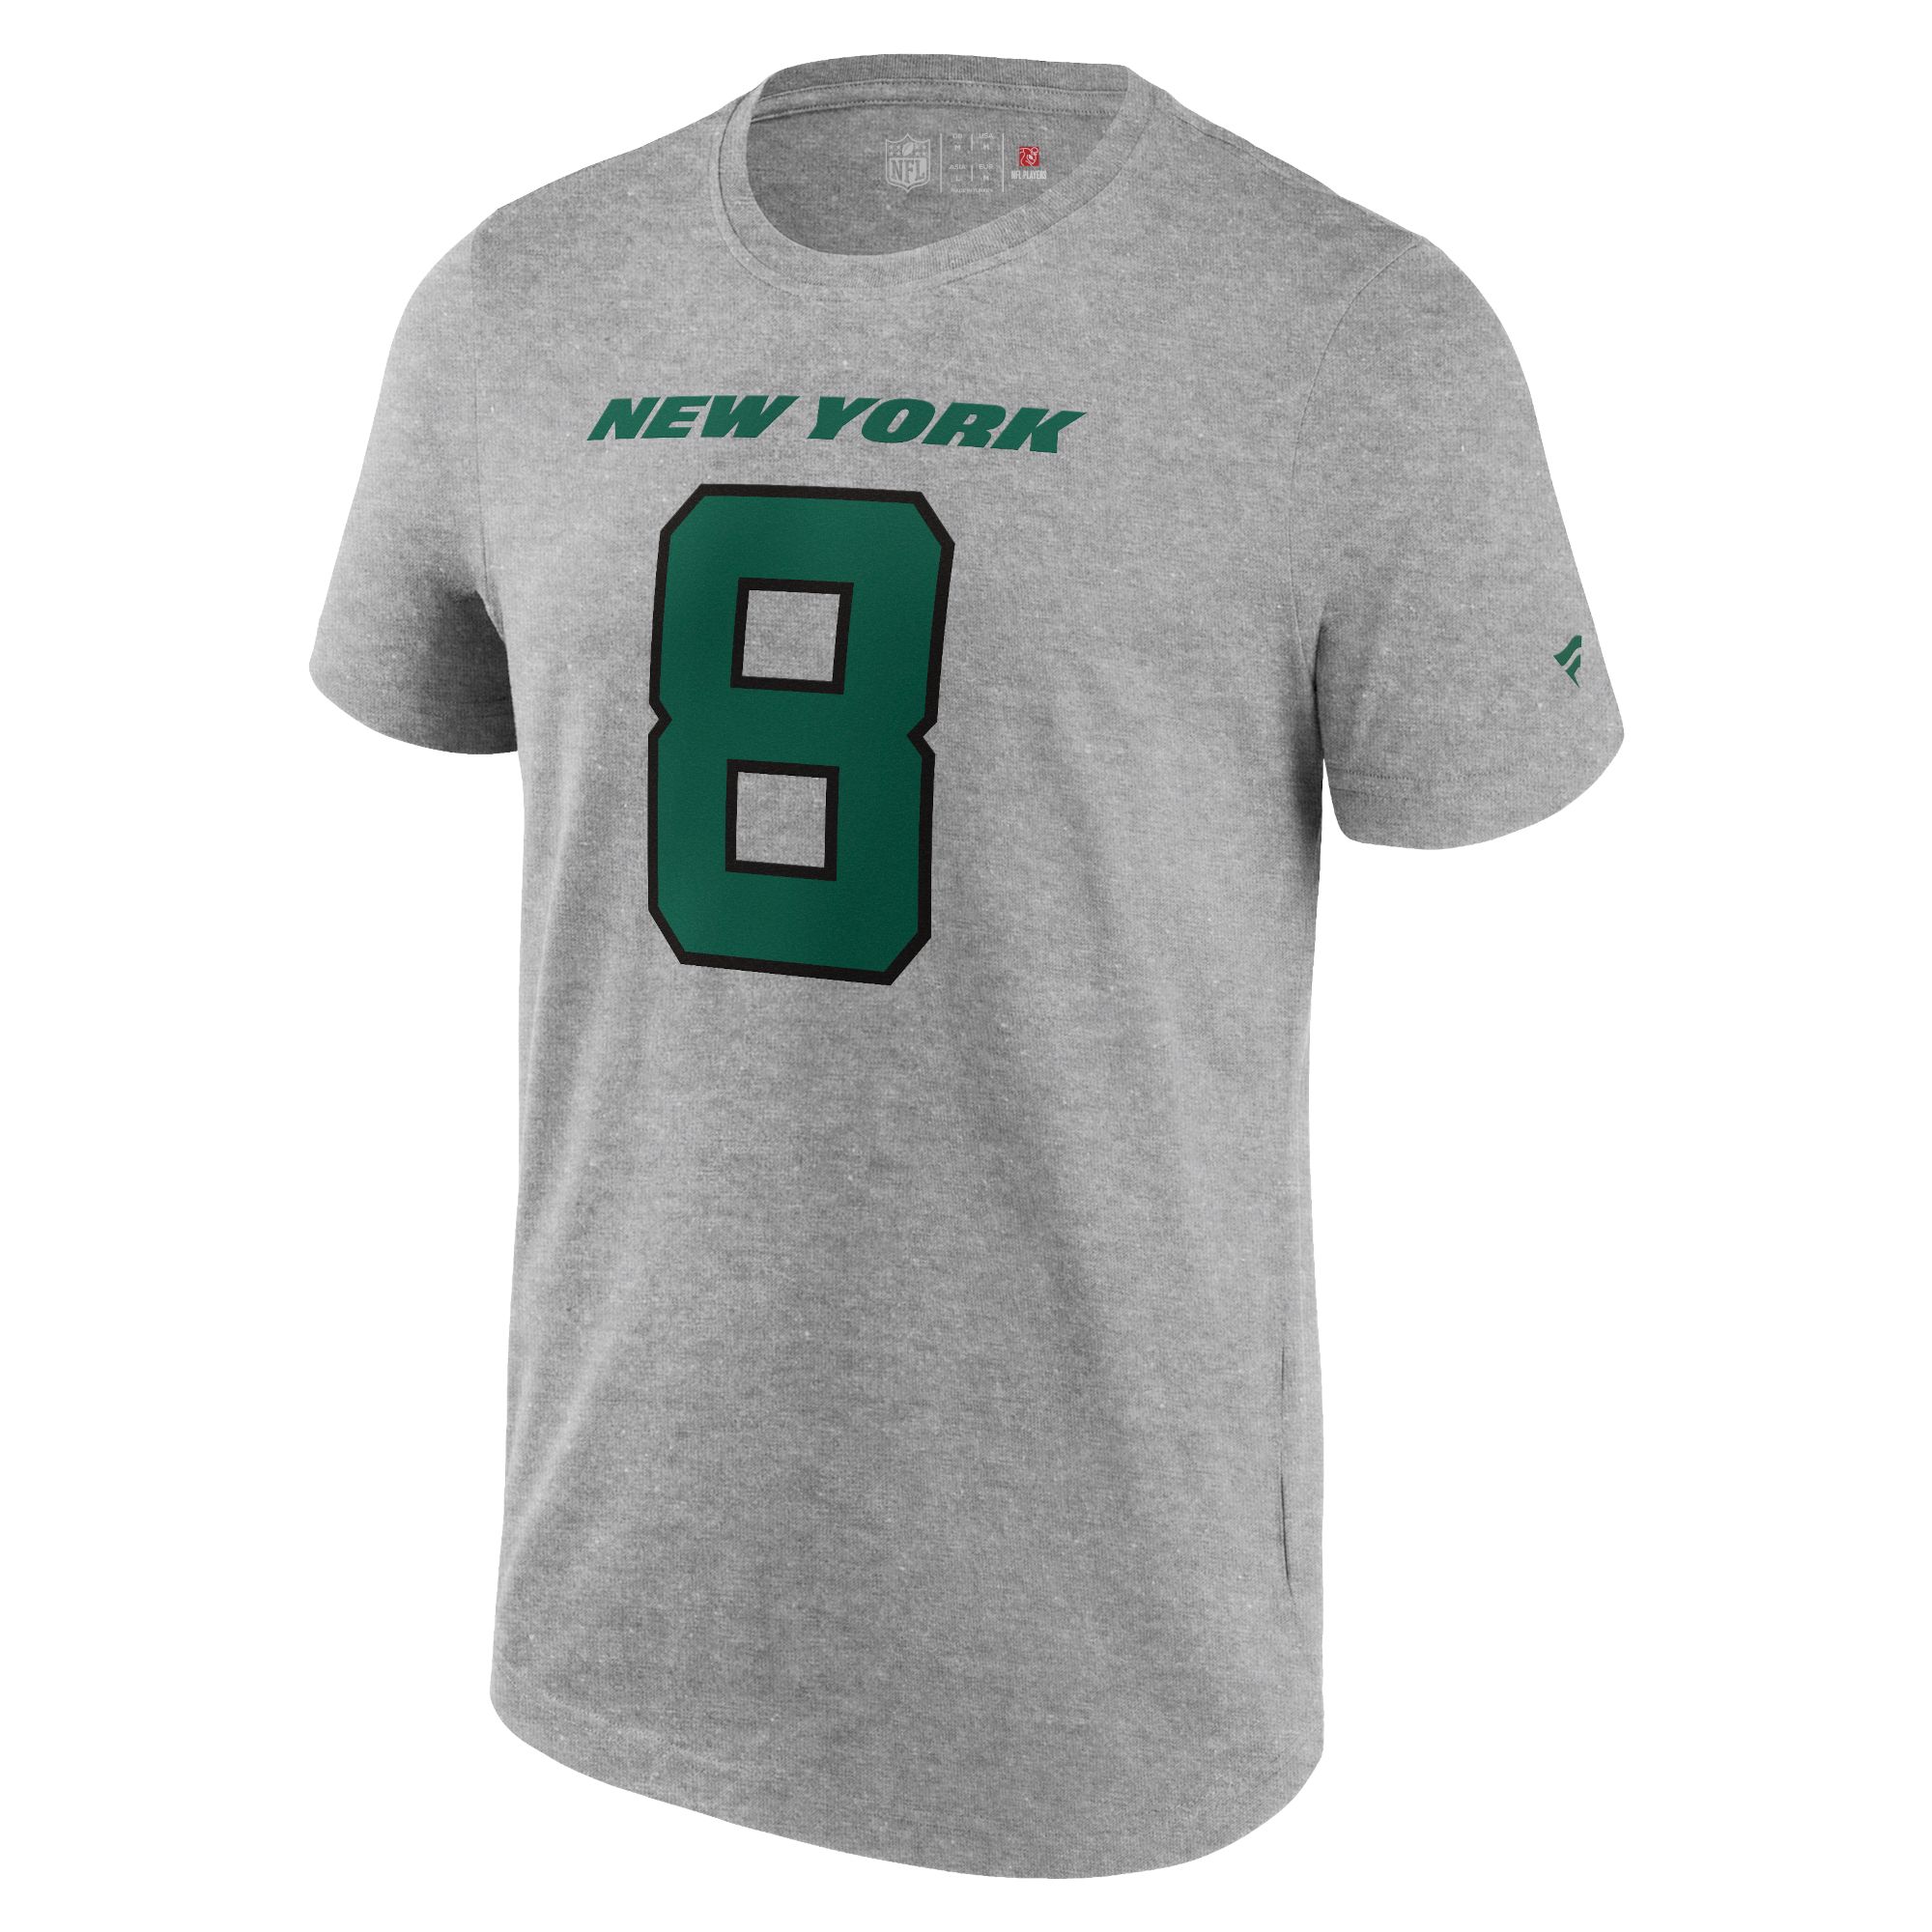 New York Jets Graphic T-Shirt Rodgers 8